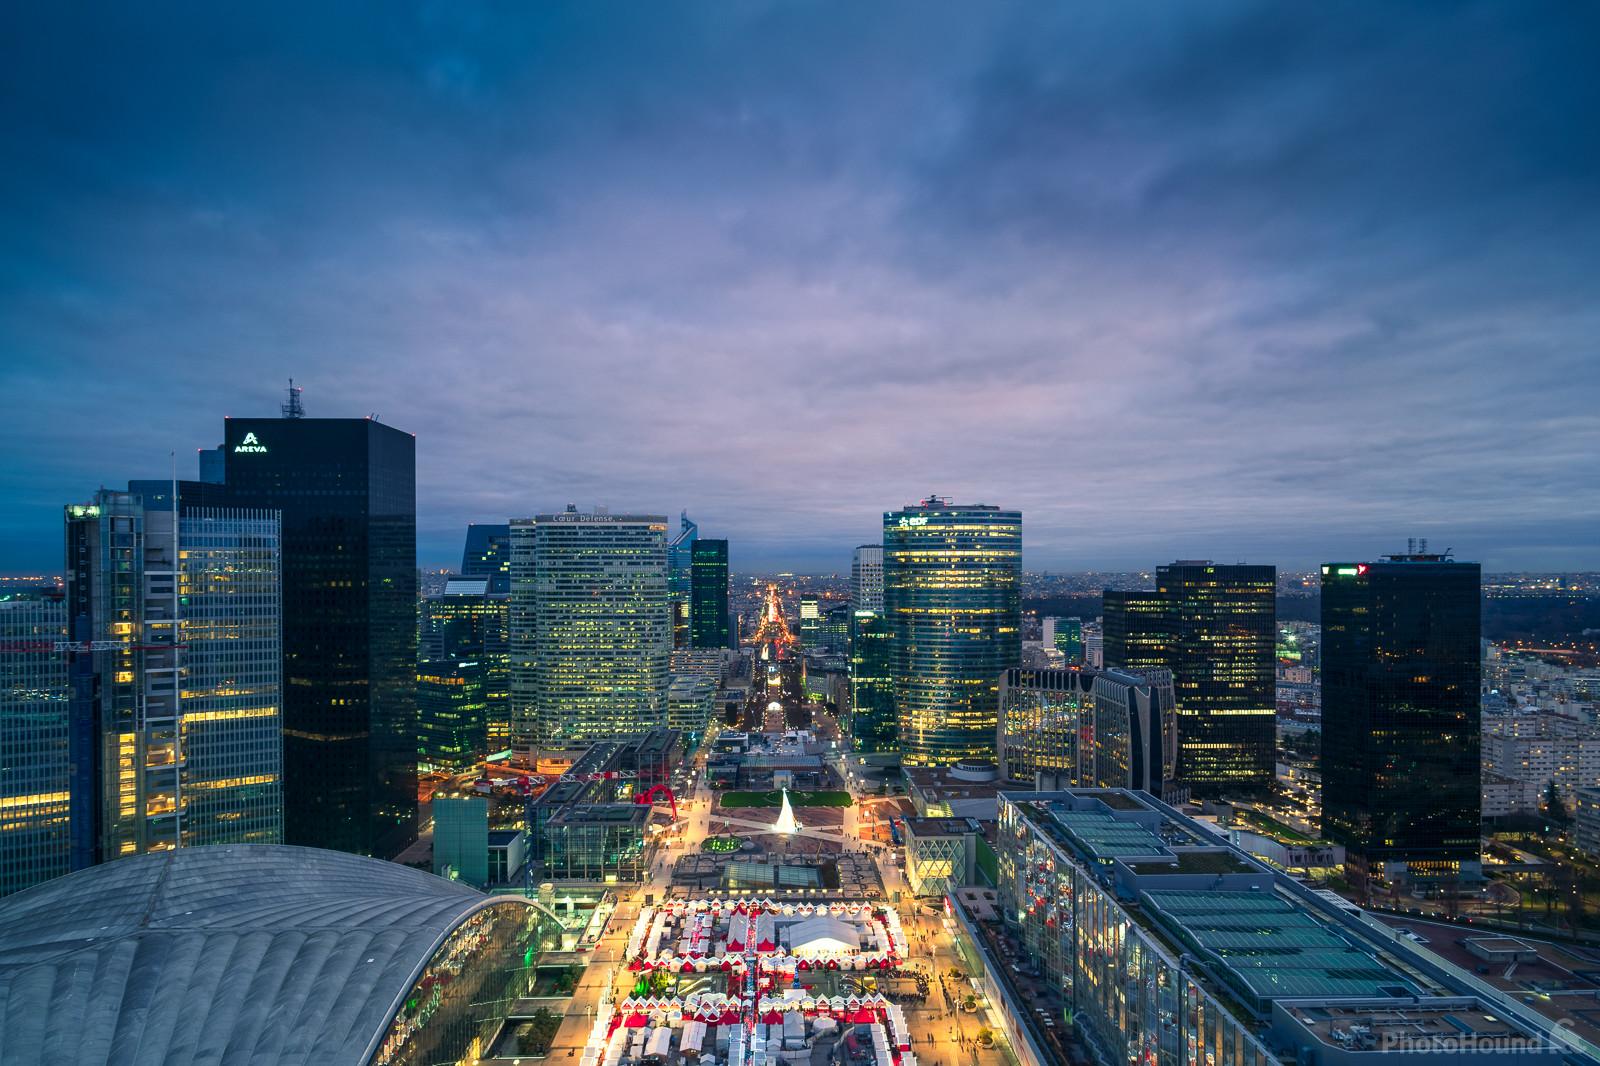 Image of Grande Arche - rooftop view by James Billings.